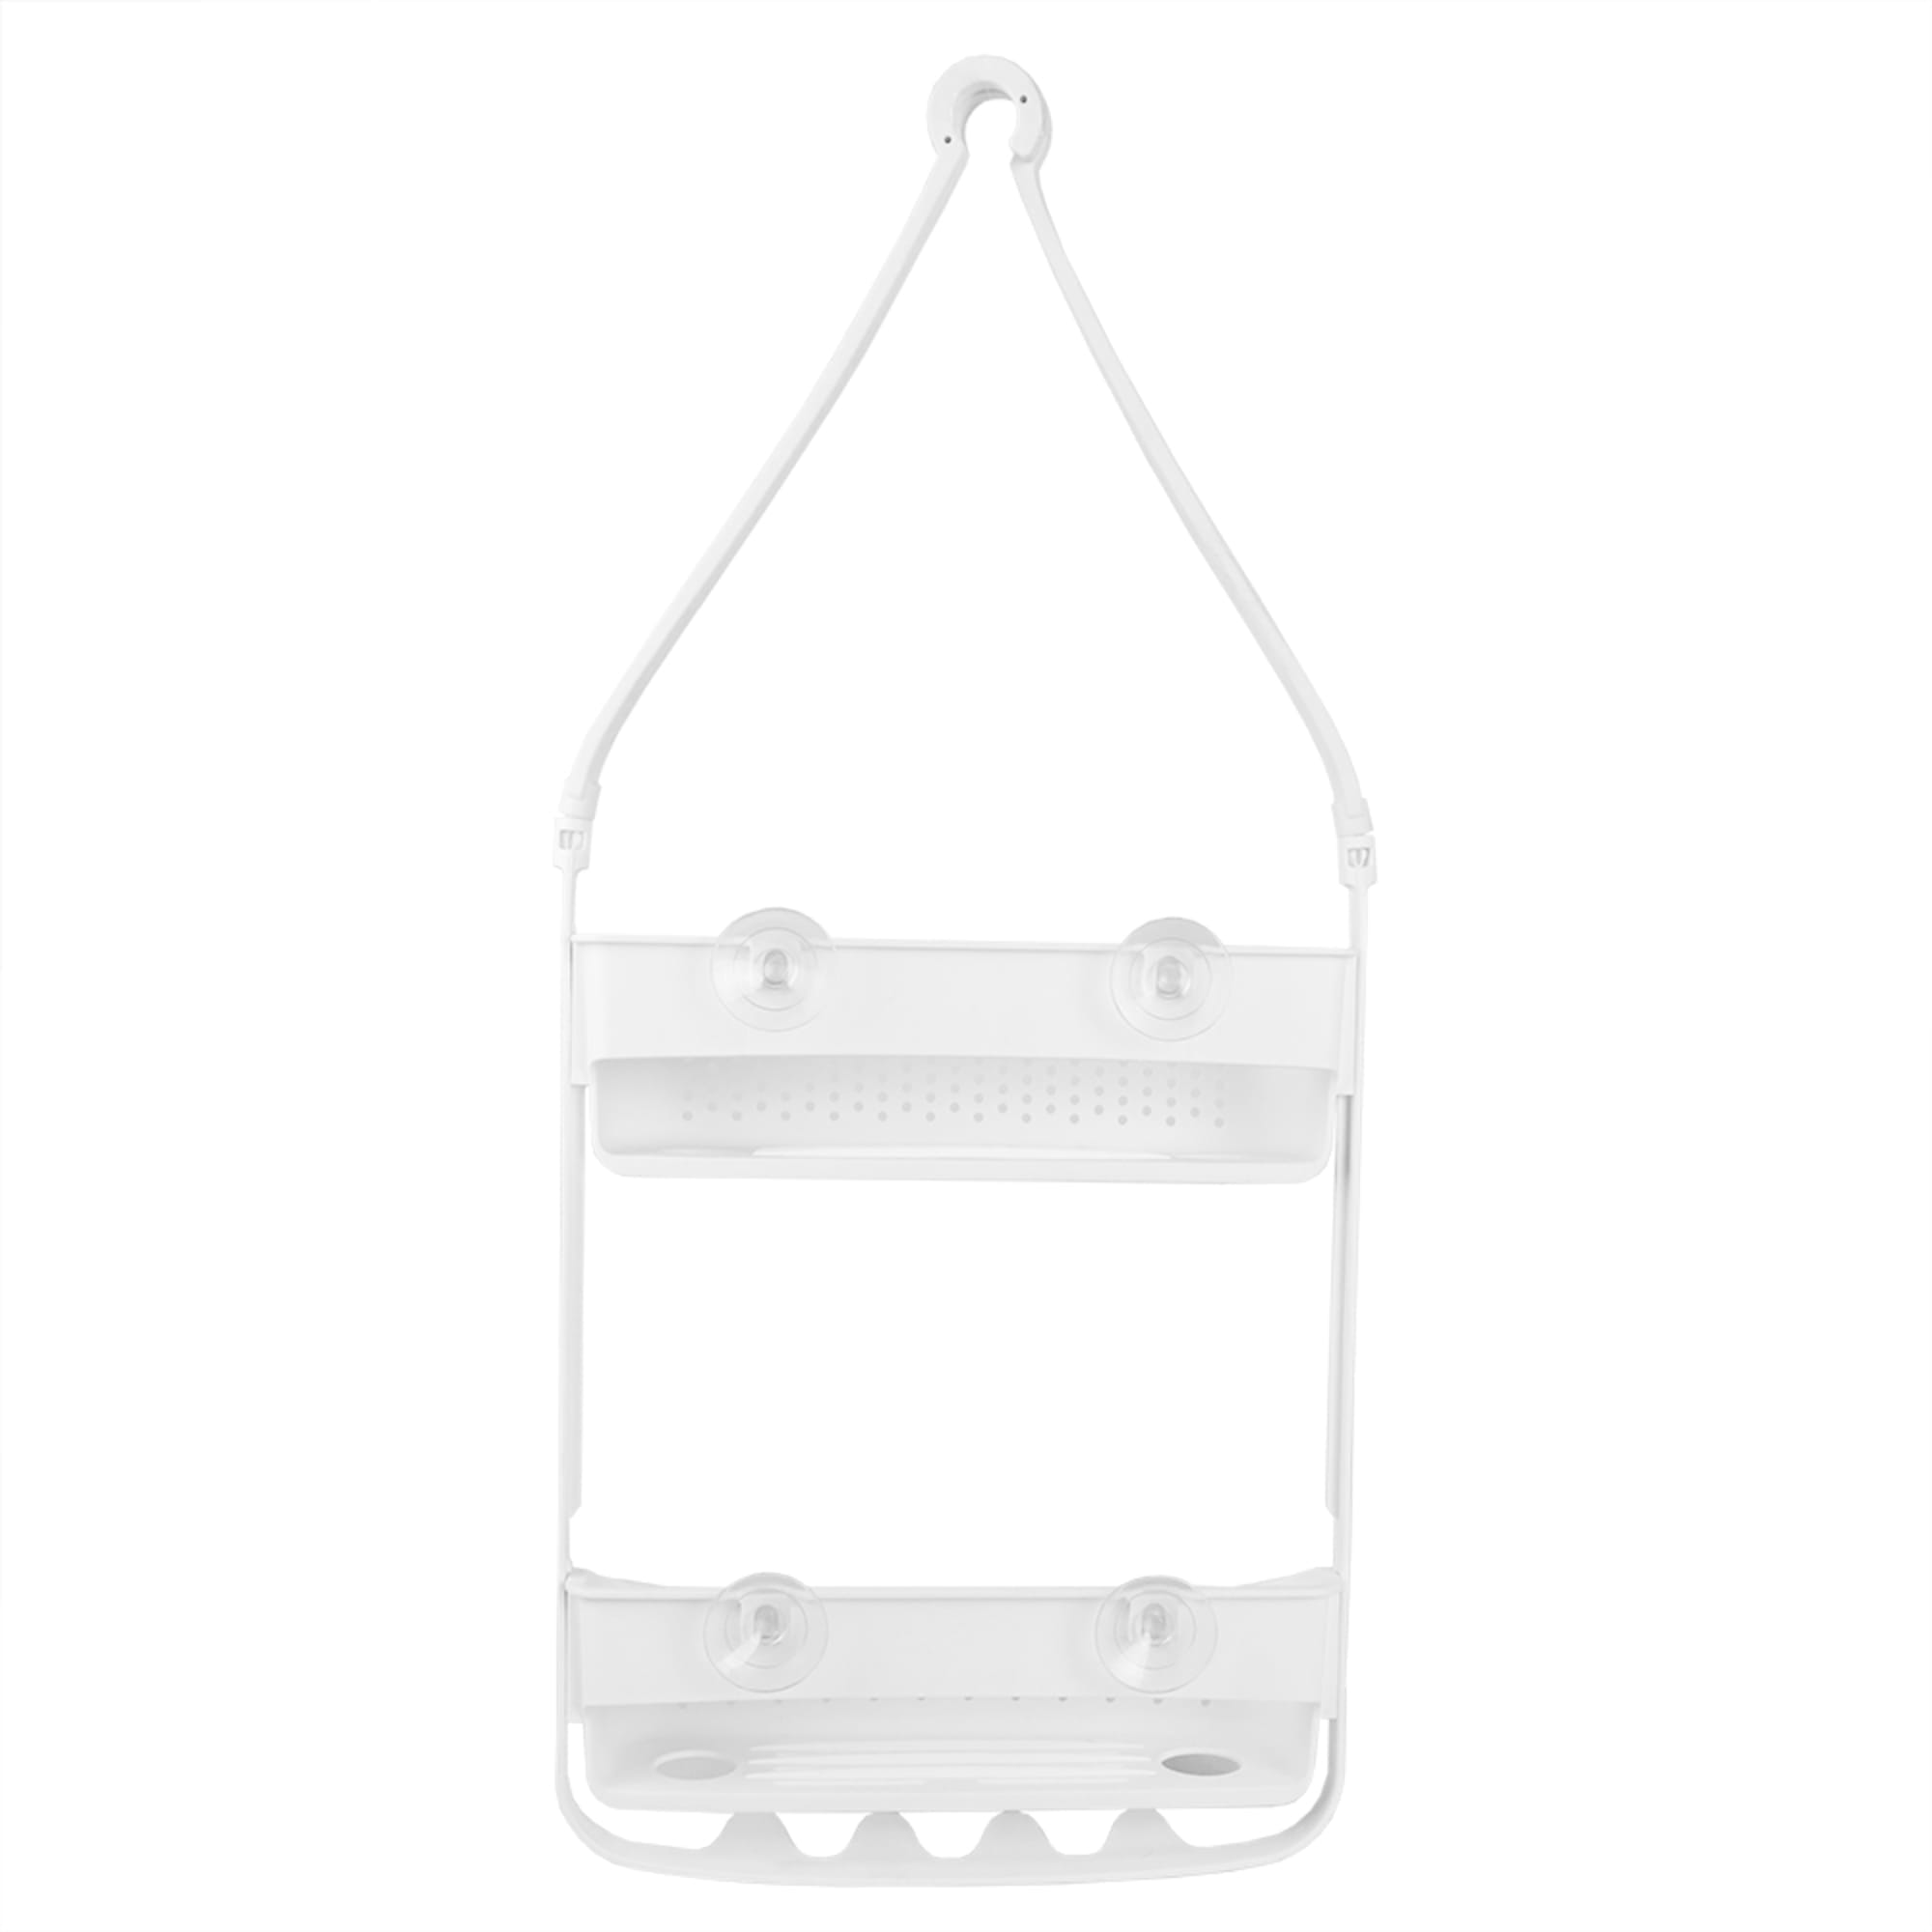 Home Basics 2 Tier Perforated Plastic Shower Caddy with Suction Cups, White $8.00 EACH, CASE PACK OF 6